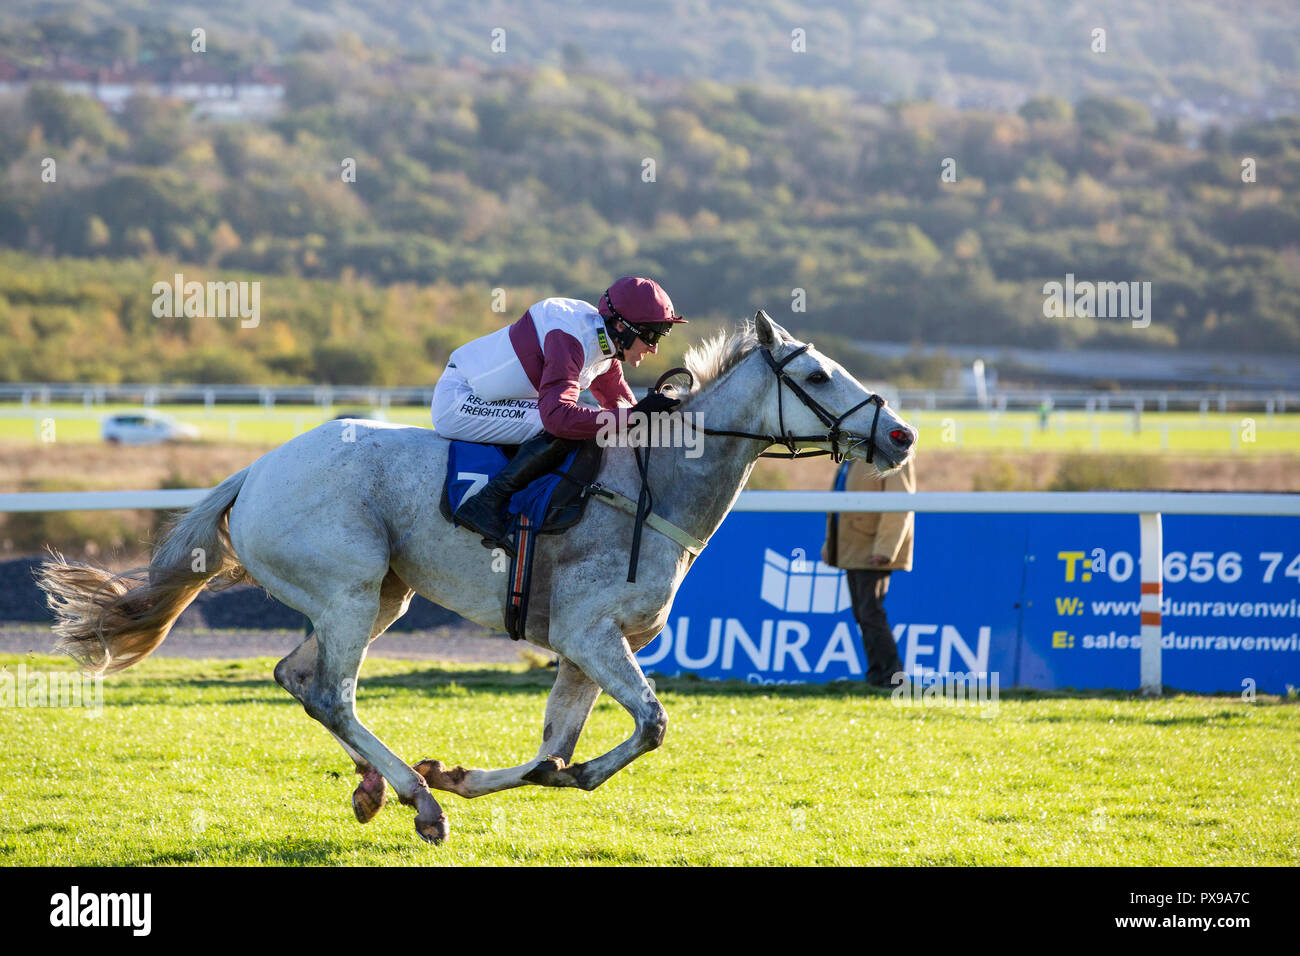 Silver Streak (jockey Adam Wedge) on the way to winning the 2018 Dunraven Group Welsh Champion Hurdle at Ffos Las racecourse Stock Photo